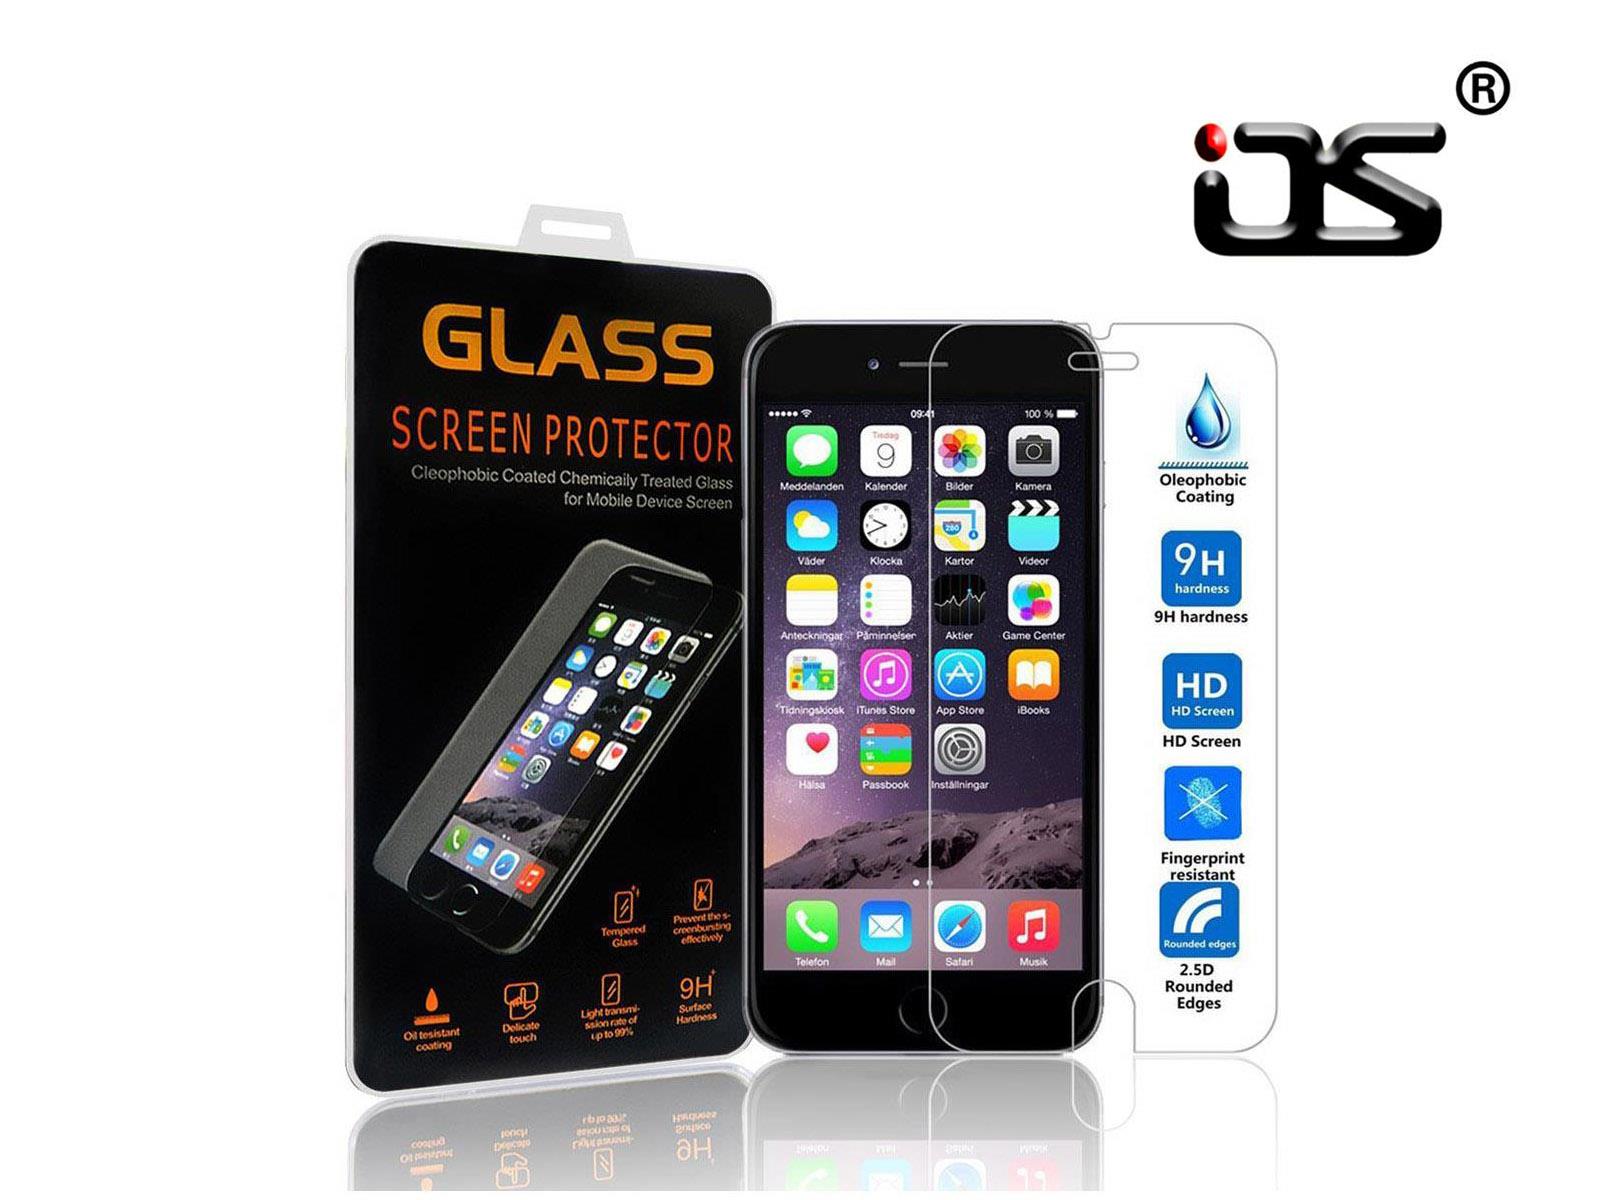 OS Tempered Glass for Apple iPhone 6 4.7"